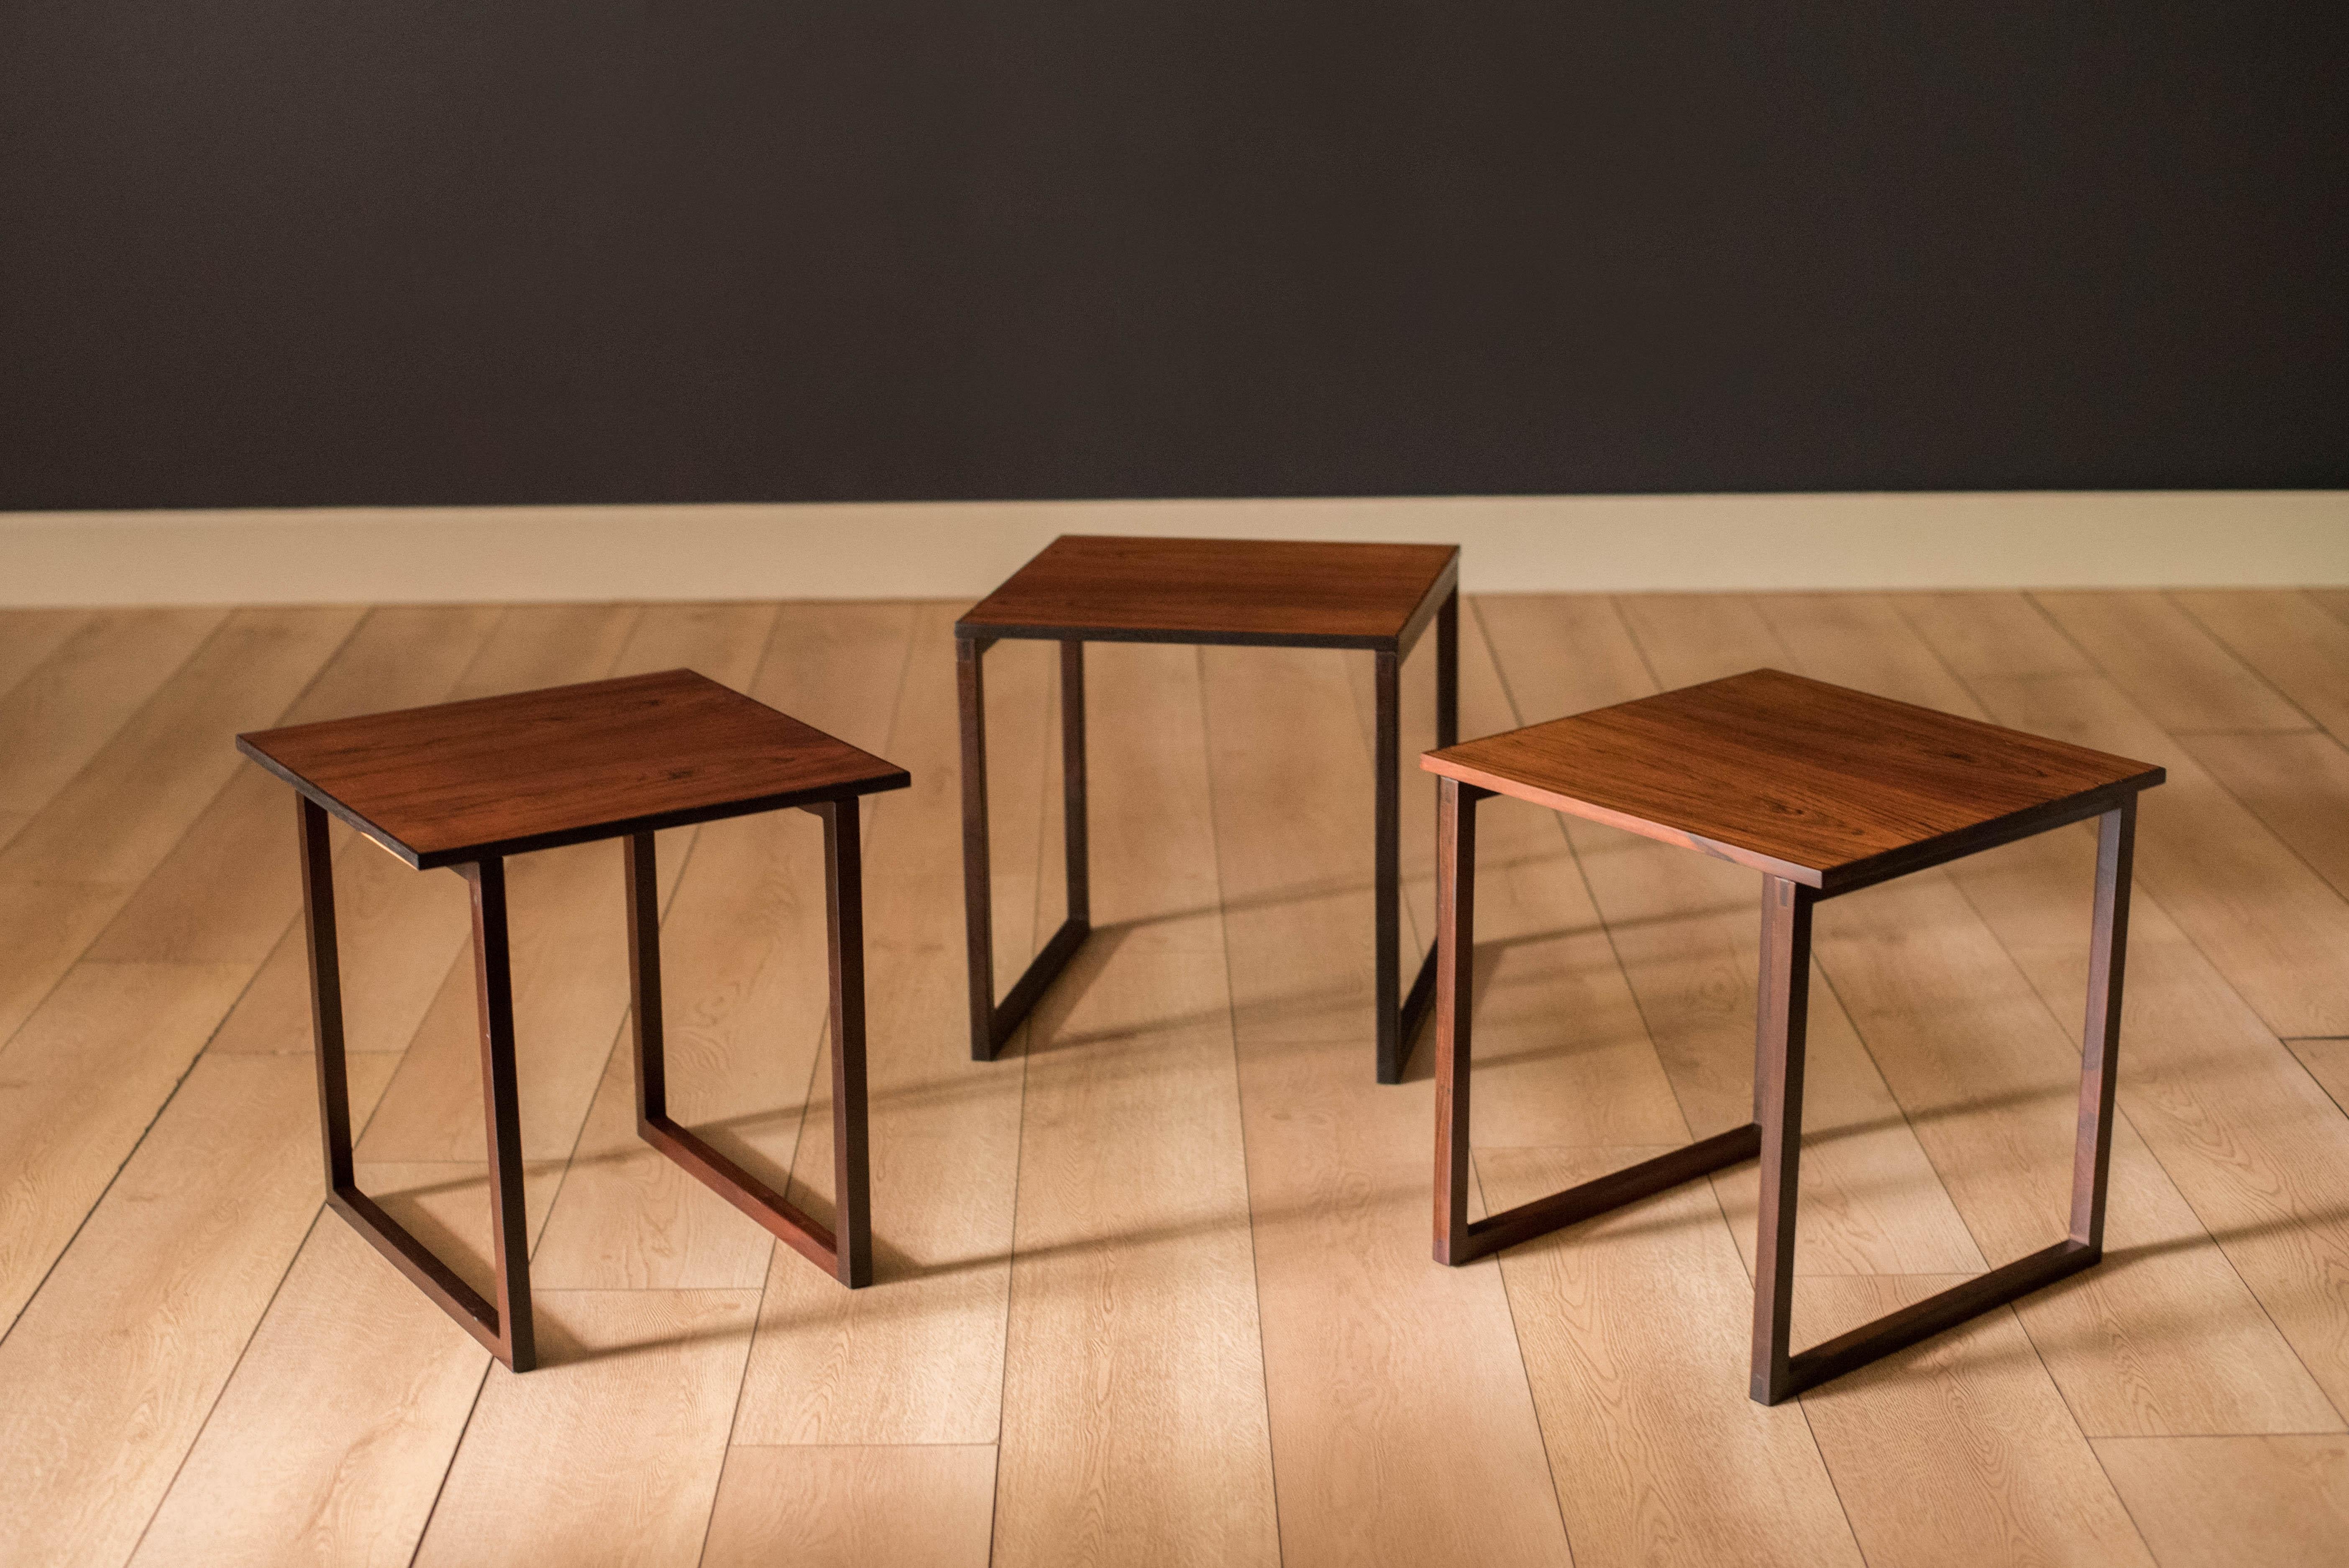 Mid-Century Modern stacking end tables designed by Kai Kristiansen for Vildbjerg Møbelfabrik, circa 1960s. Features natural rosewood grains and detailed joinery on the supporting bases. This set includes three square end tables that can be used